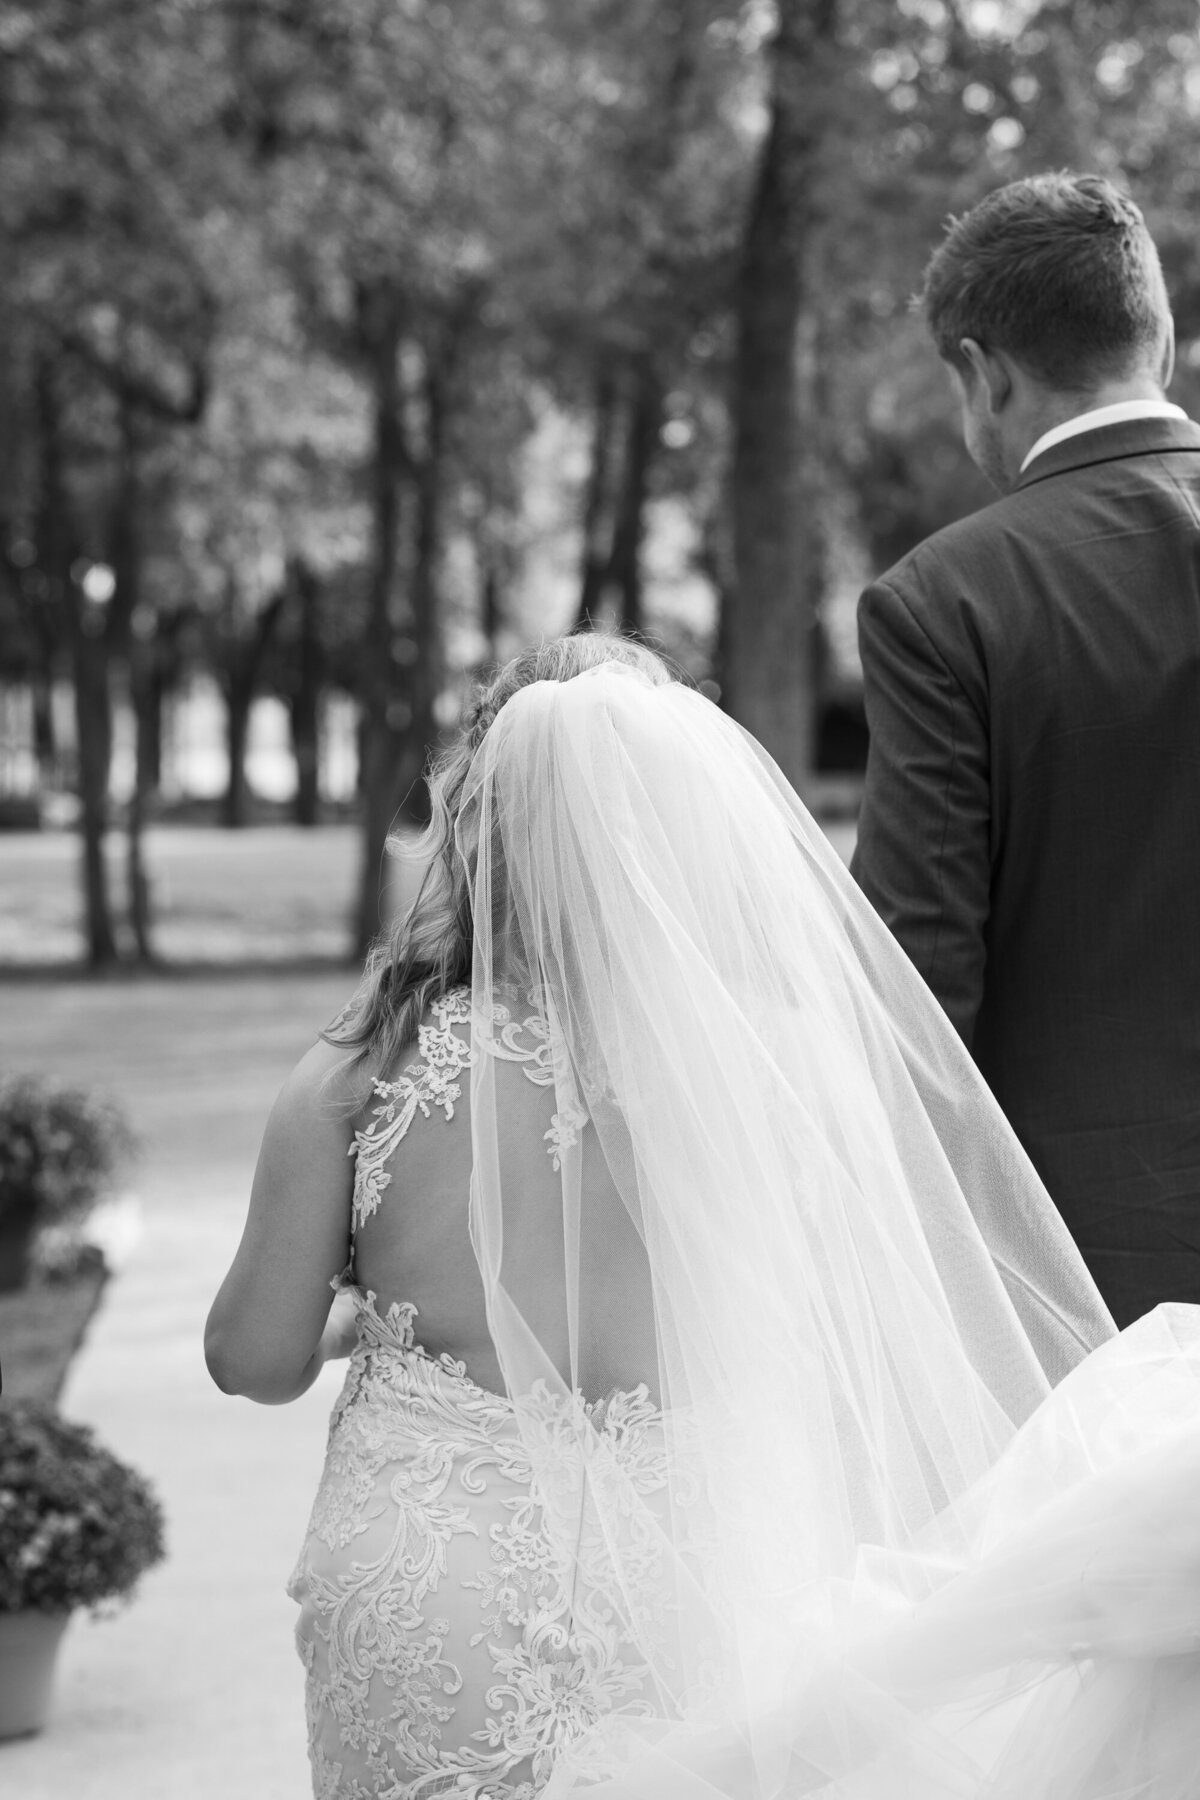 Austin wedding photographer captures a stunning black and white photo of a bride and groom elegantly walking down a path.